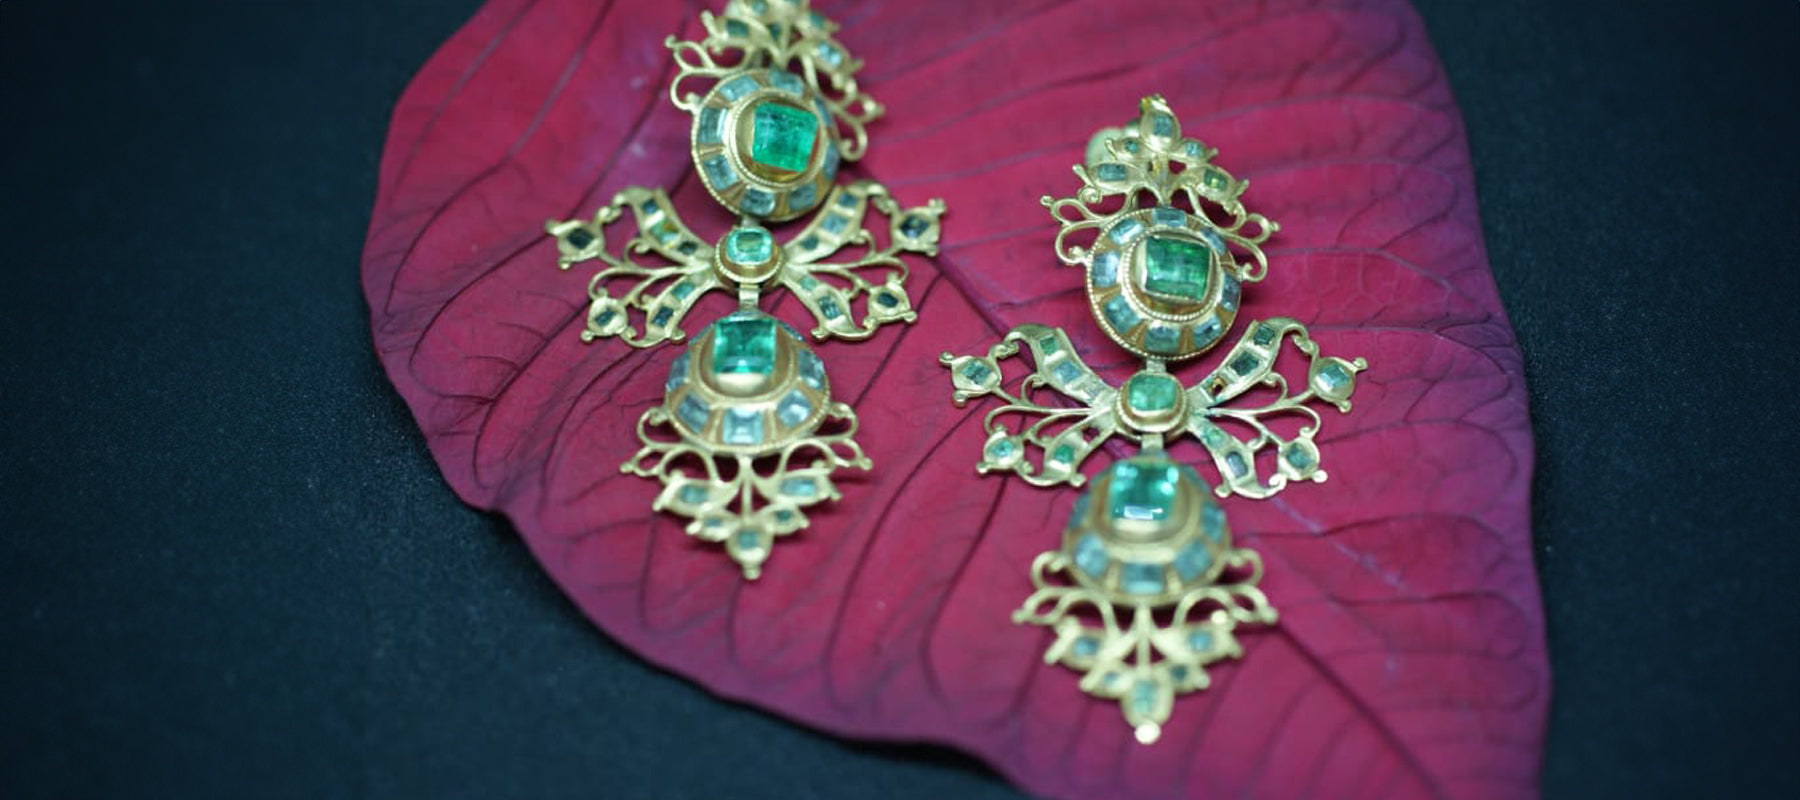 ANTIQUE, VINTAGE & SIGNED EARRINGS